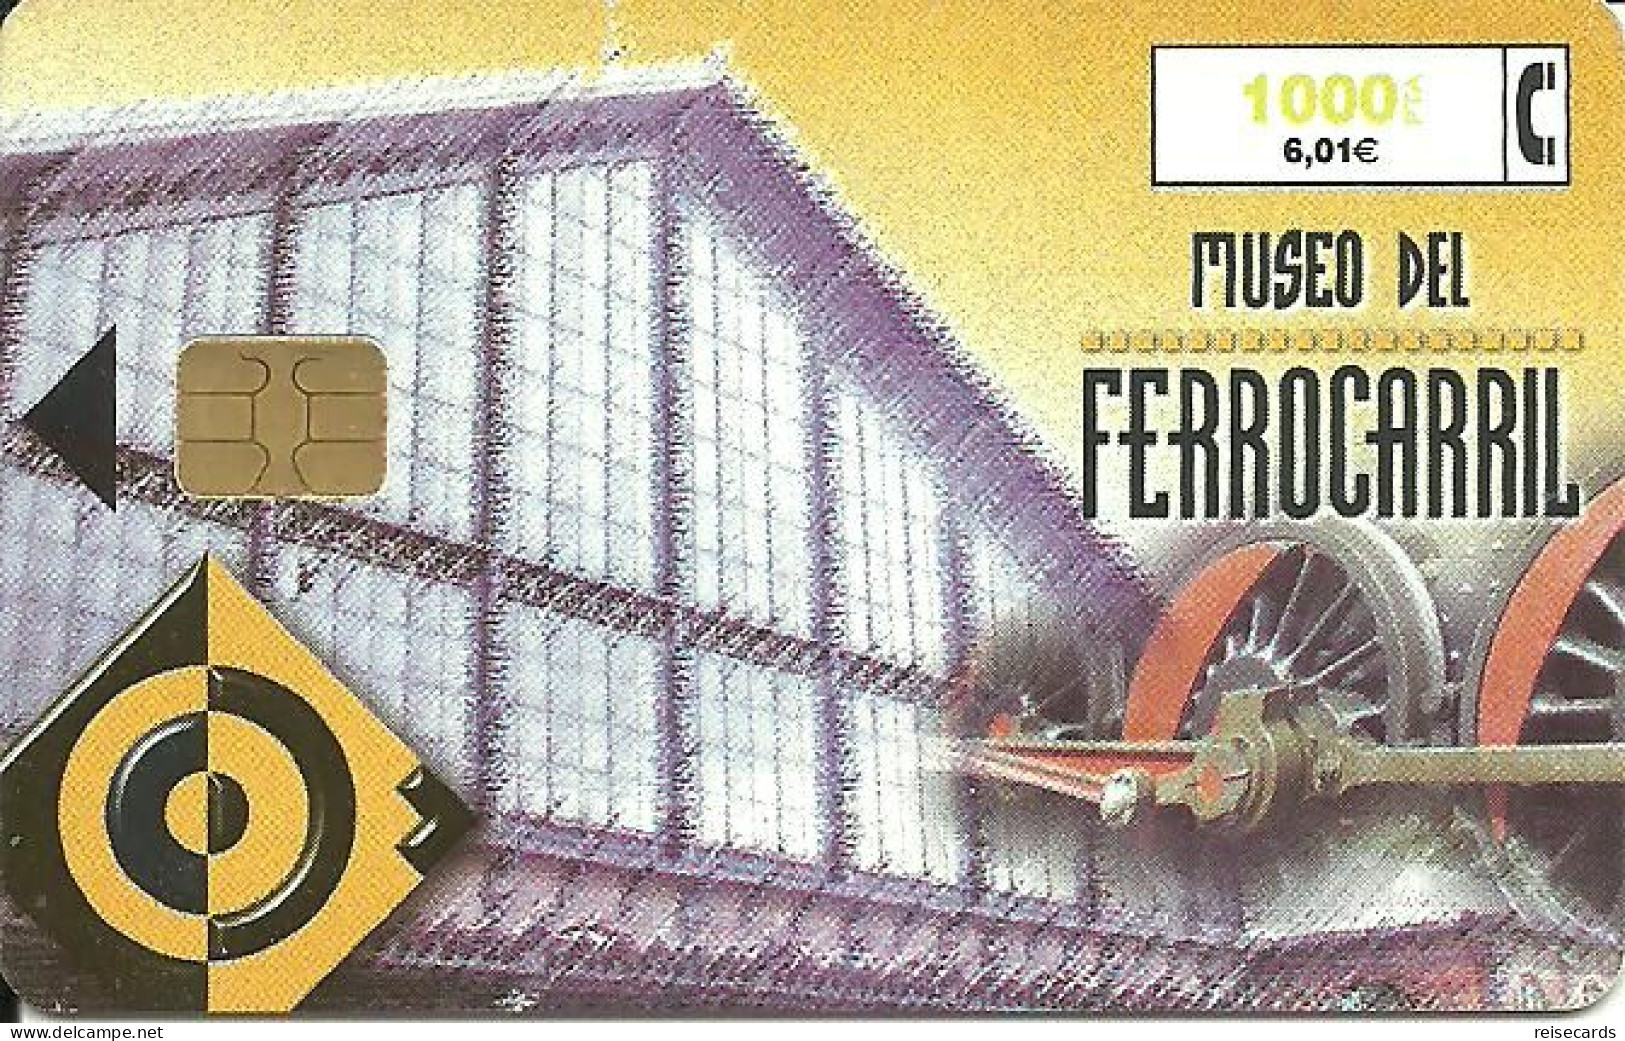 Spain: Telefonica - 1999 Museo Del Ferrocarril - Private Issues